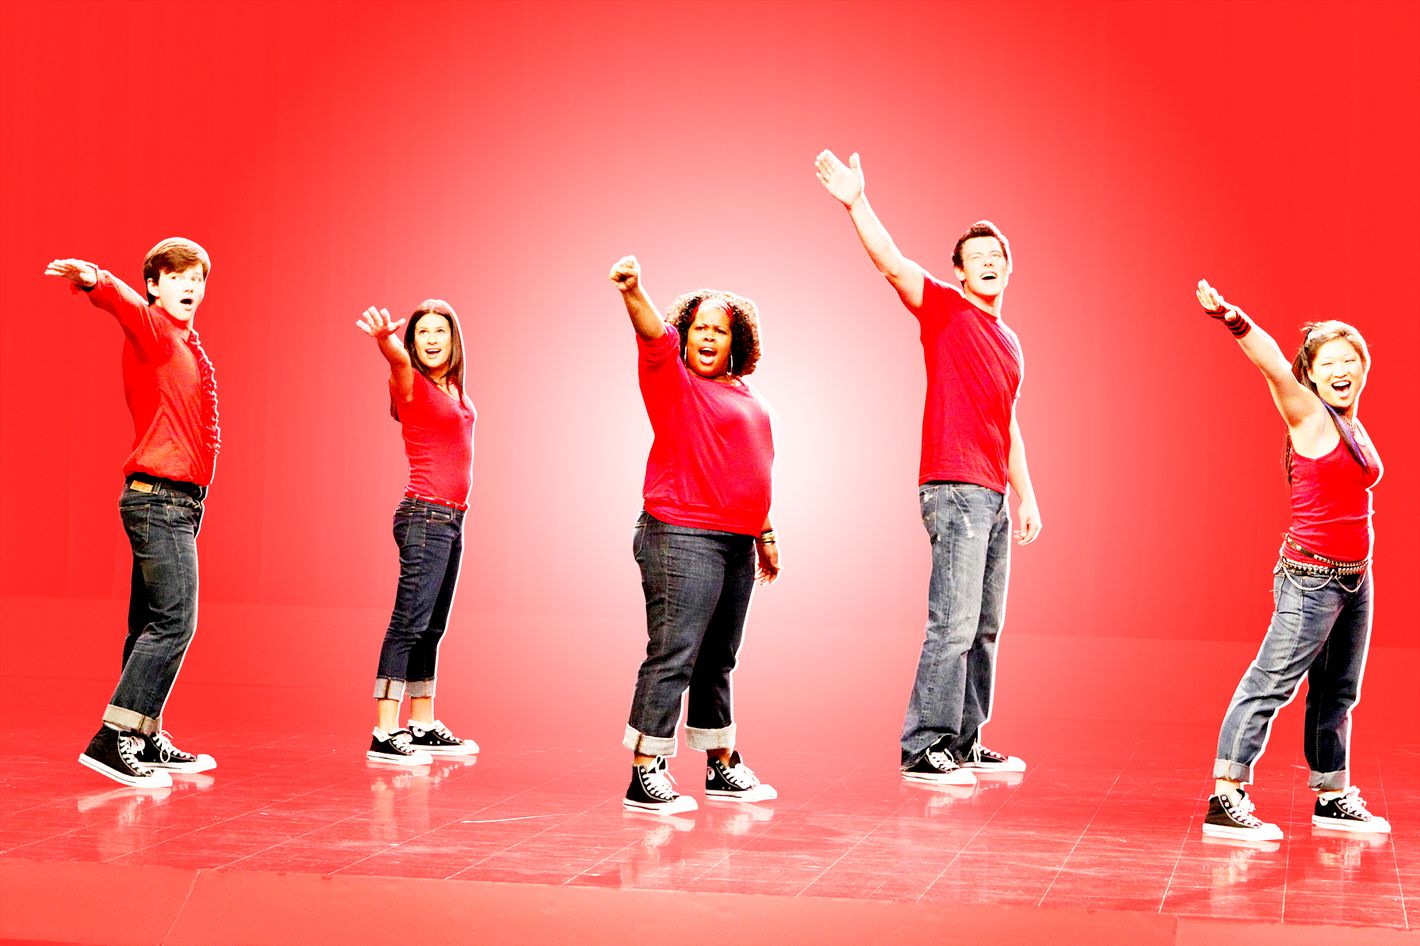 Pretending (Glee Cast Version) - song and lyrics by Glee Cast